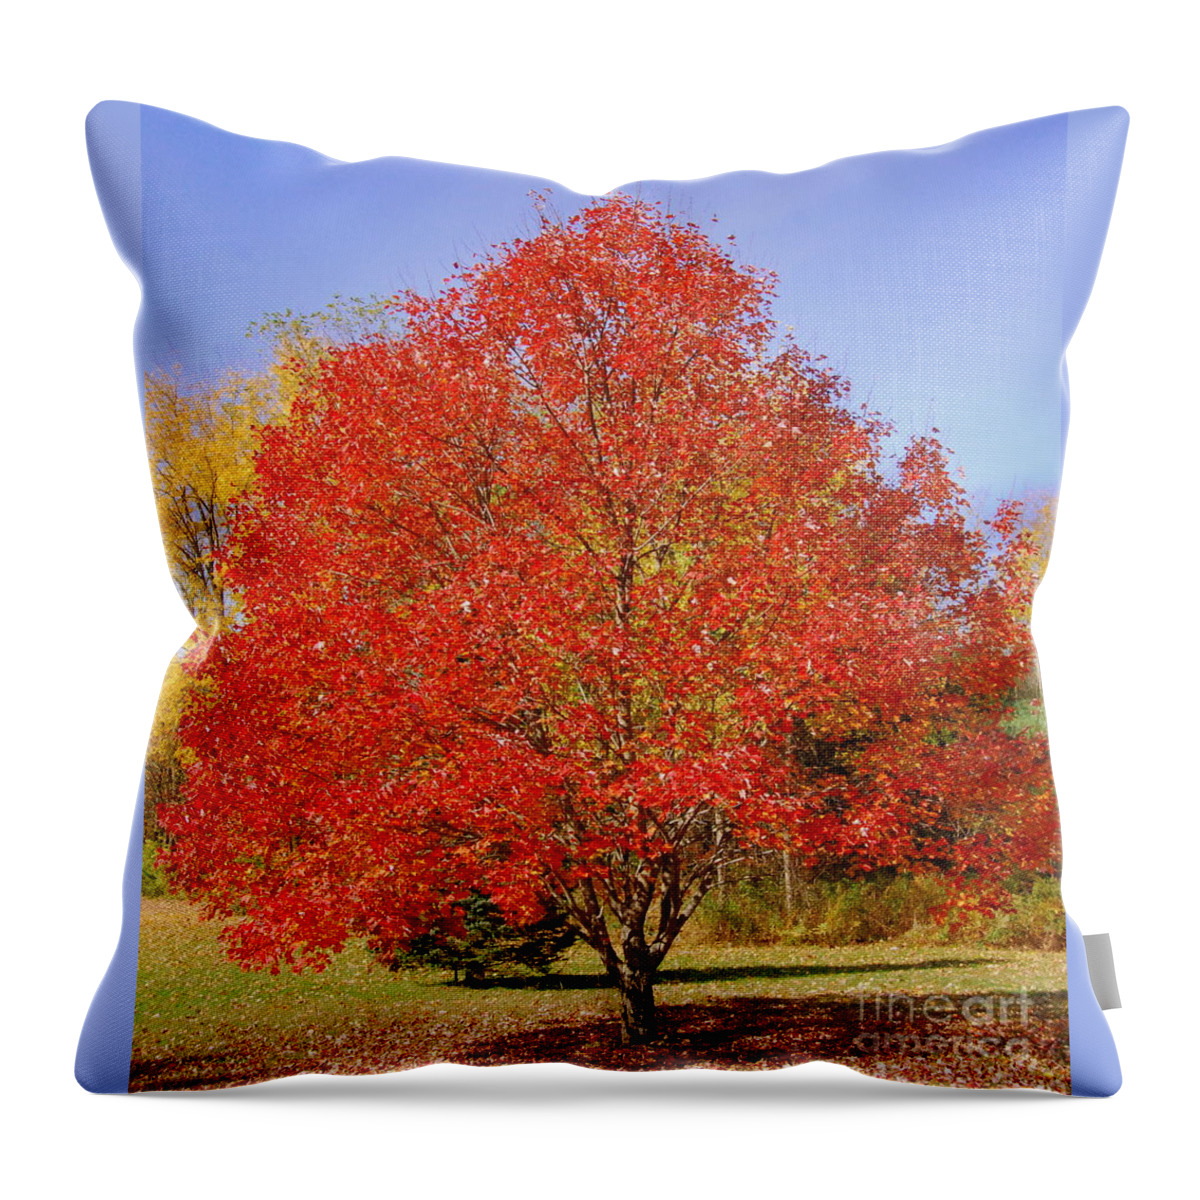 Single Tree Throw Pillow featuring the photograph Single Tree by Eunice Miller